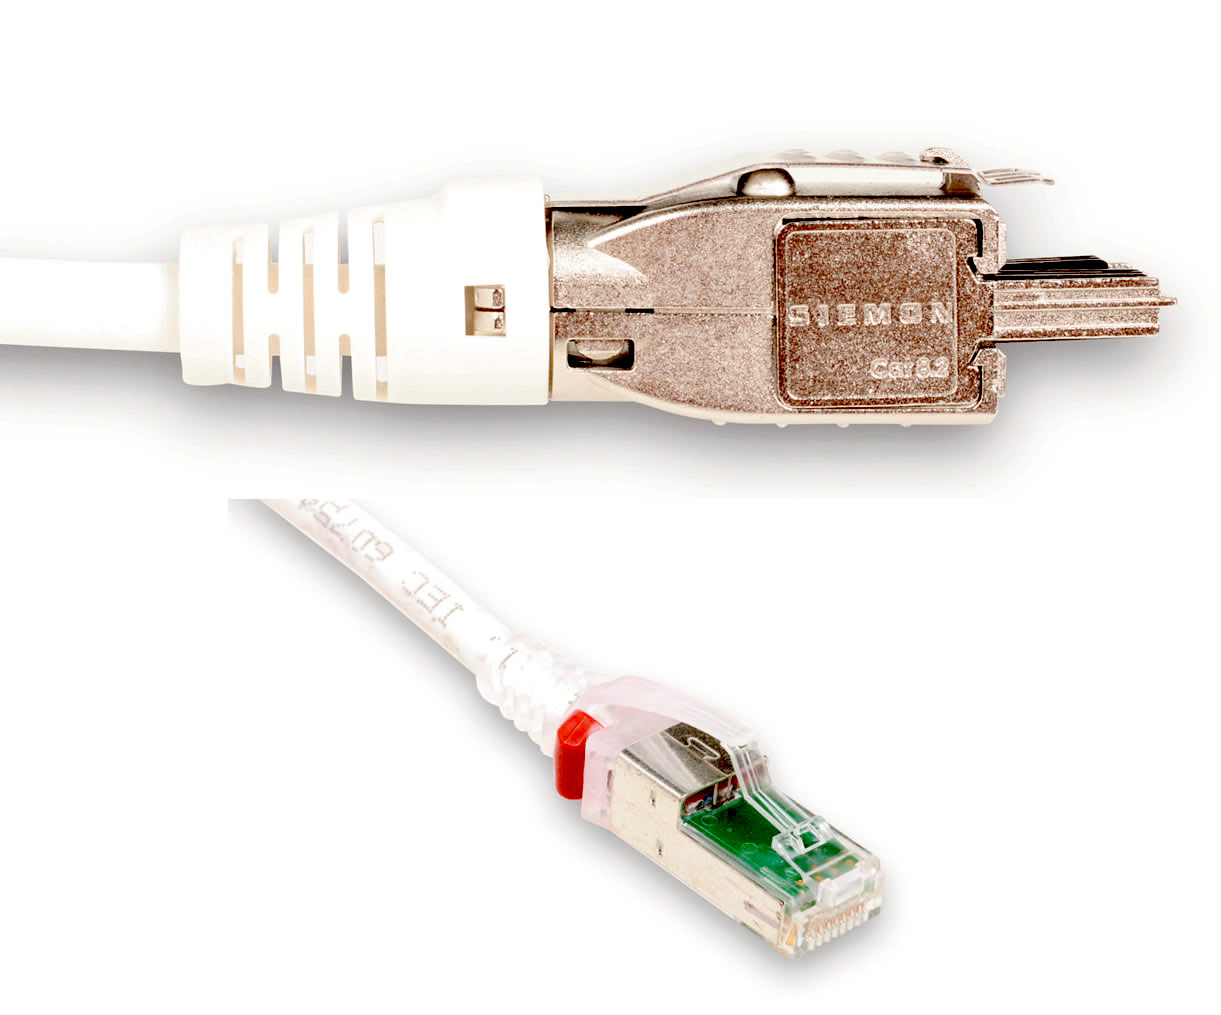 Automotive Connector and Cable Products: Siemon Interconnect Solutions’ TERA Category 8.2 Patch Cords